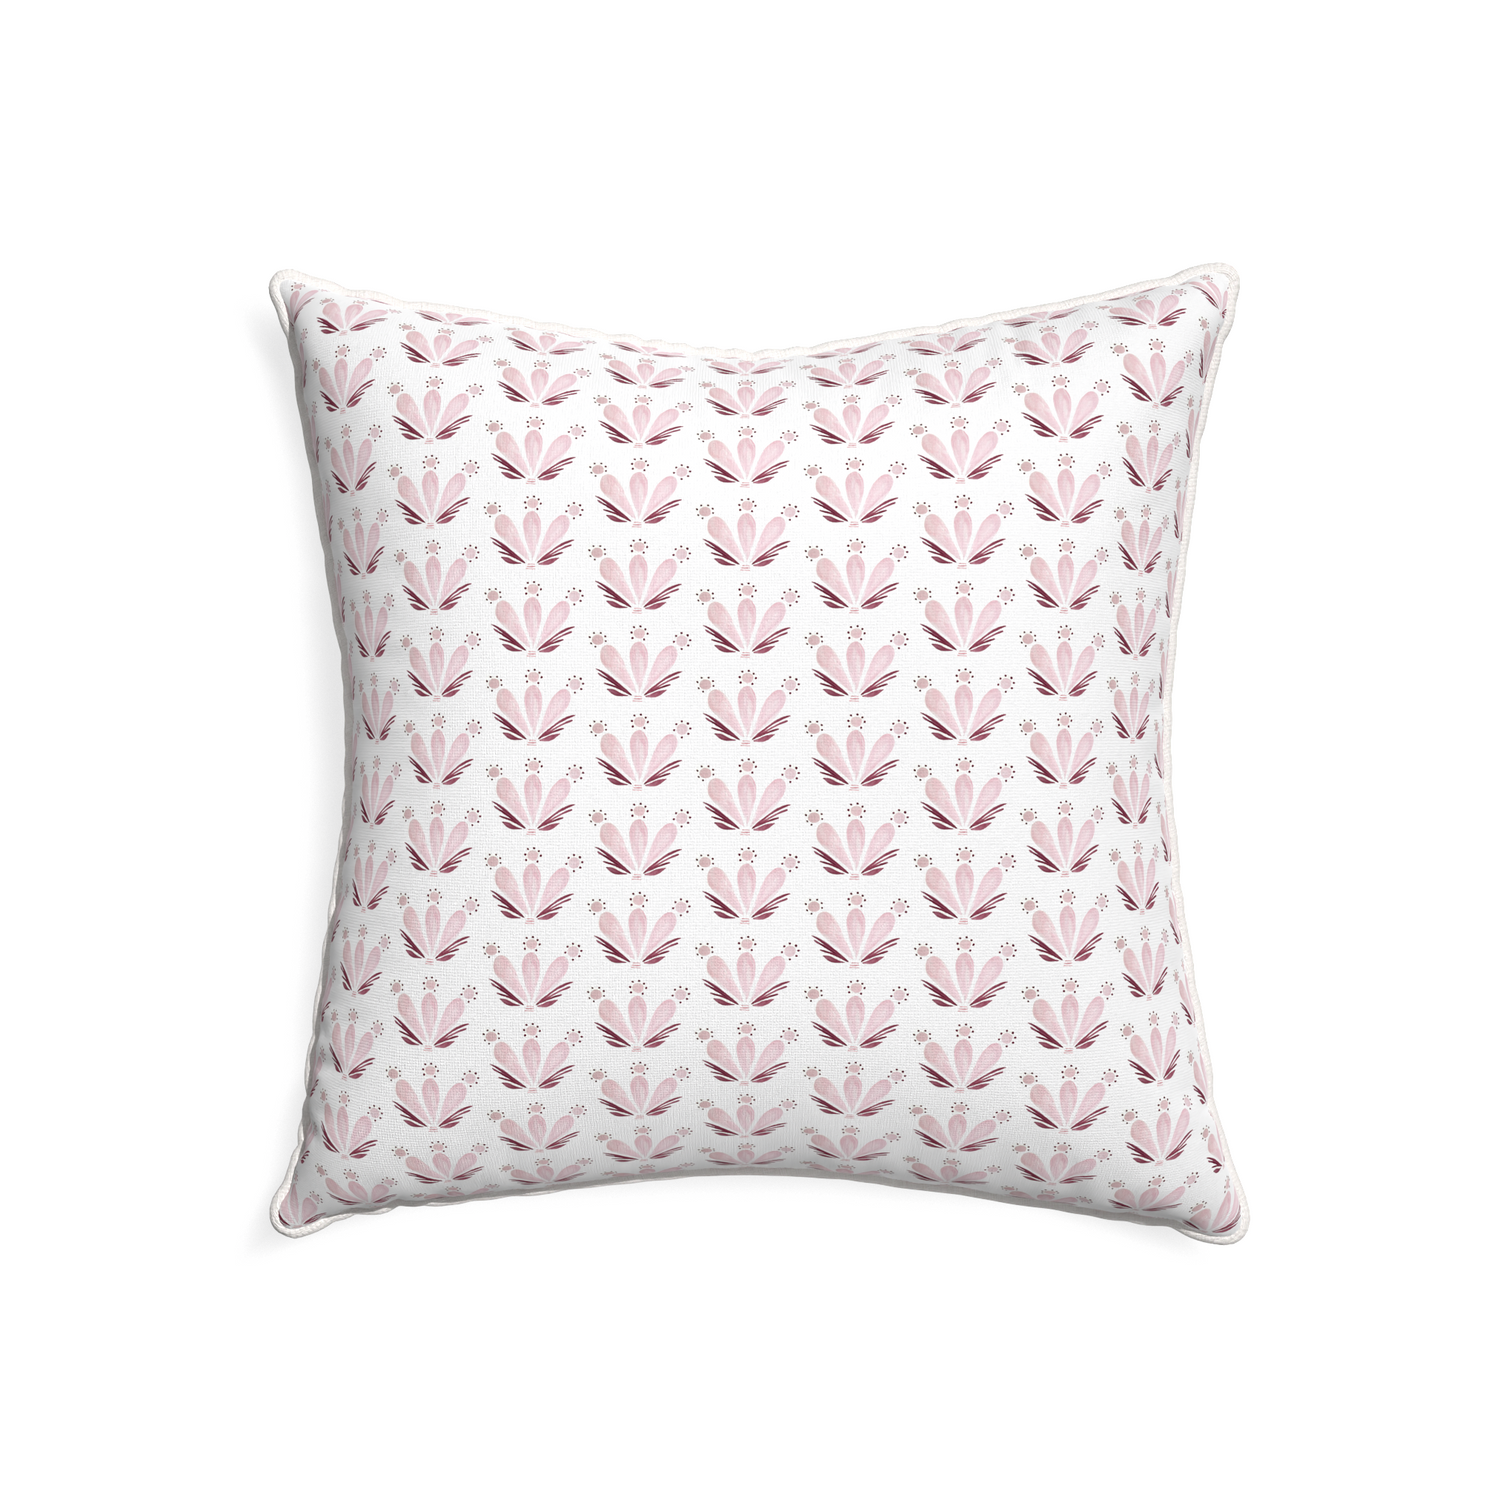 22-square serena pink custom pillow with snow piping on white background